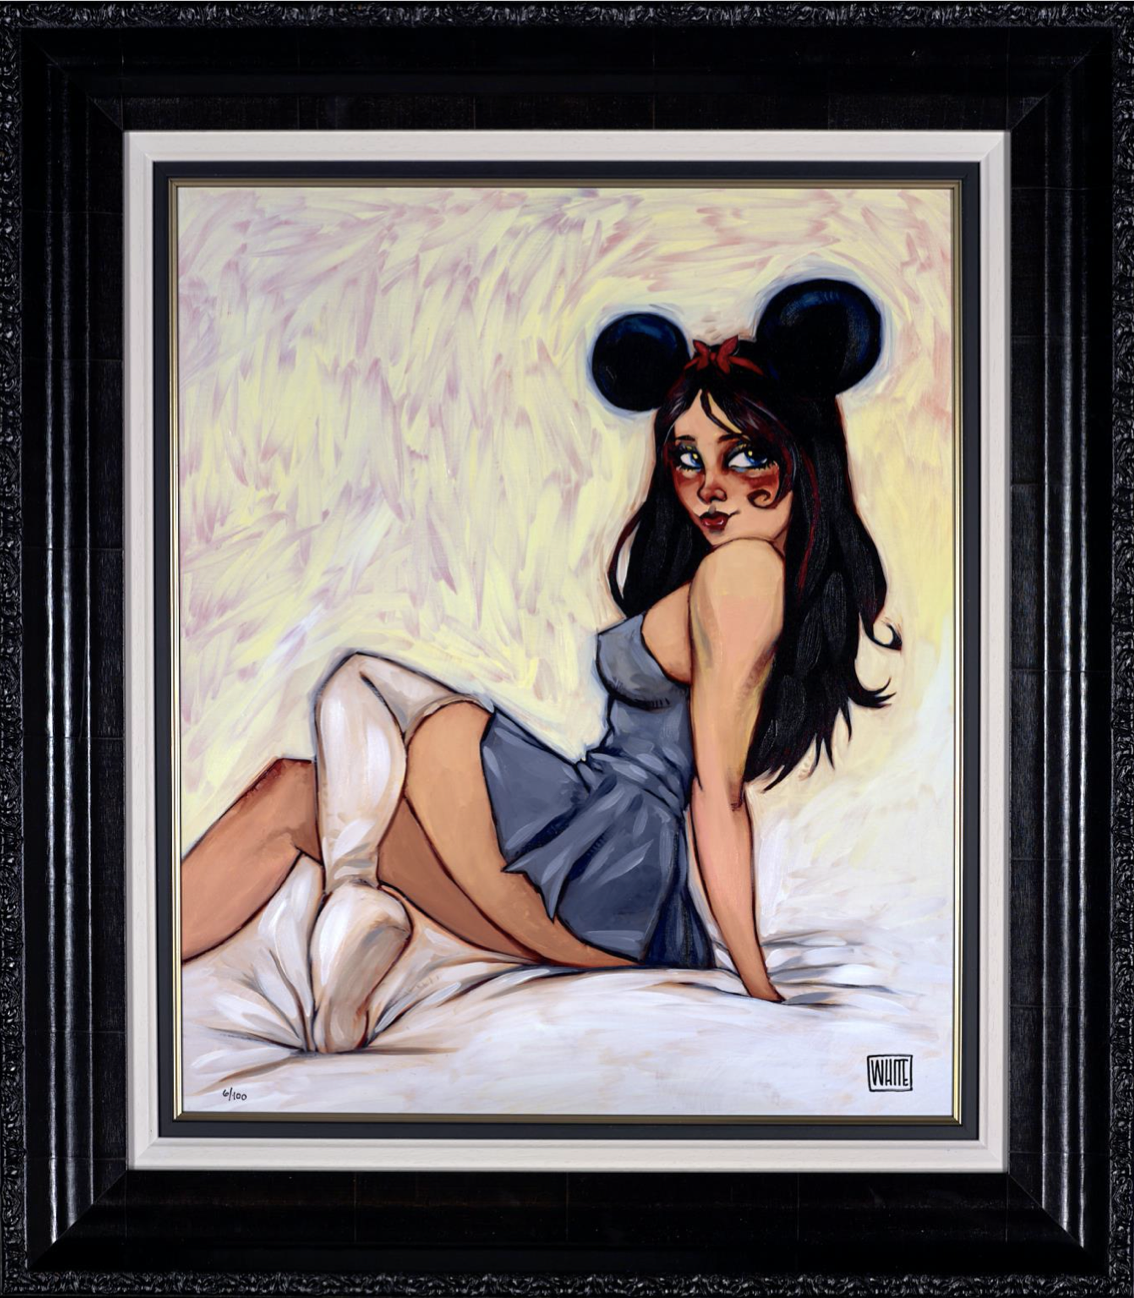 Mouseketeer by Todd White